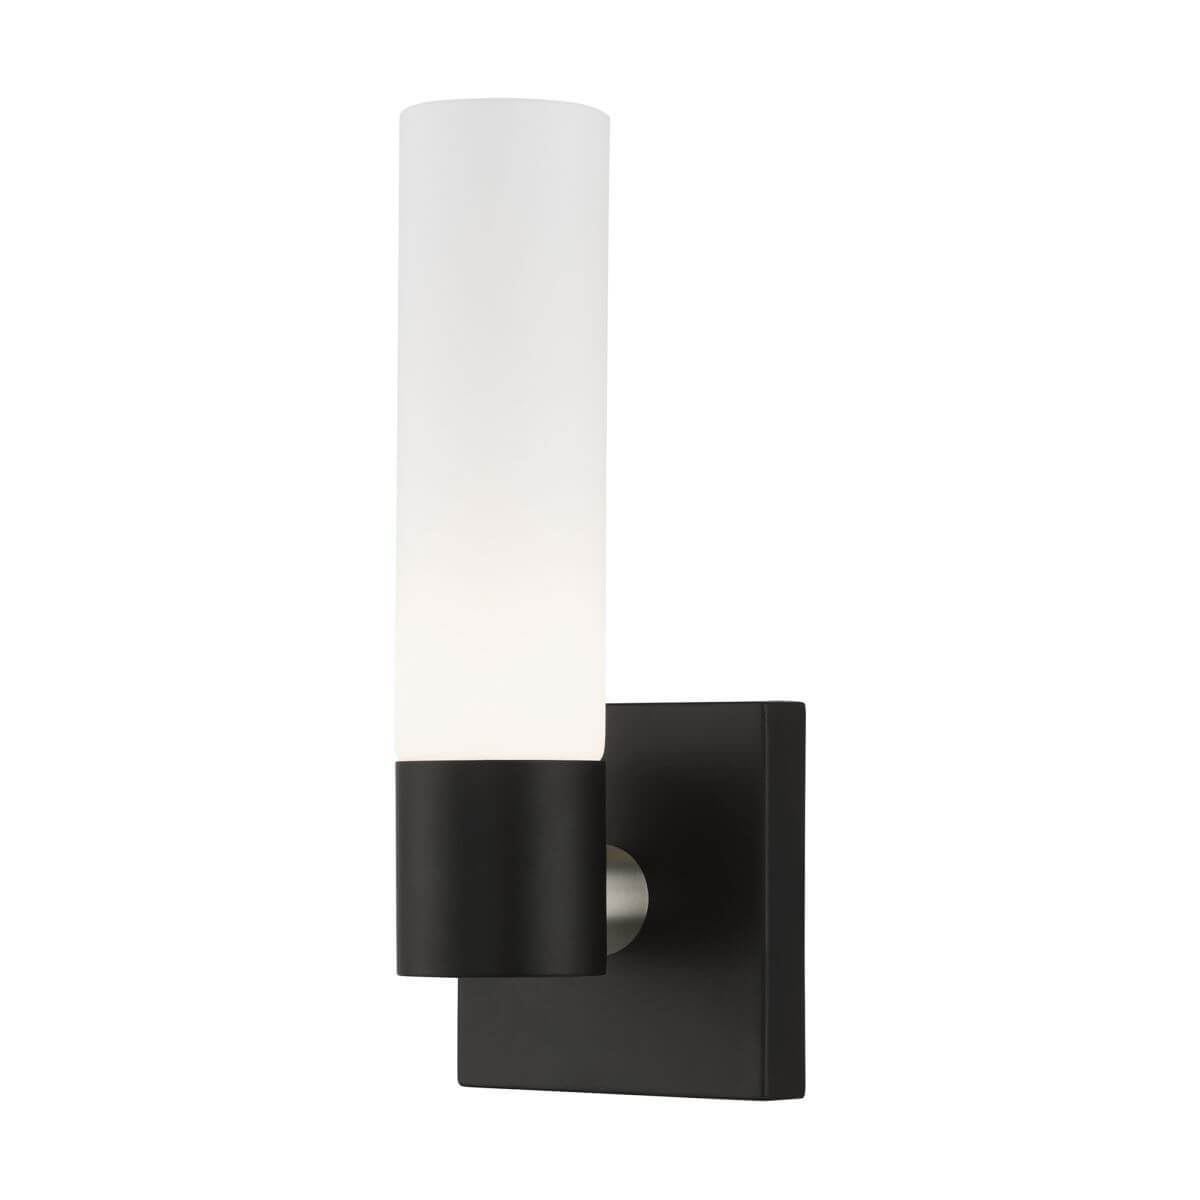 Livex 10101-04 Aero 1 Light 11 inch Tall Wall Sconce in Black-Brushed Nickel Accent with Hand Blown Satin Opal White Twist Lock Glass